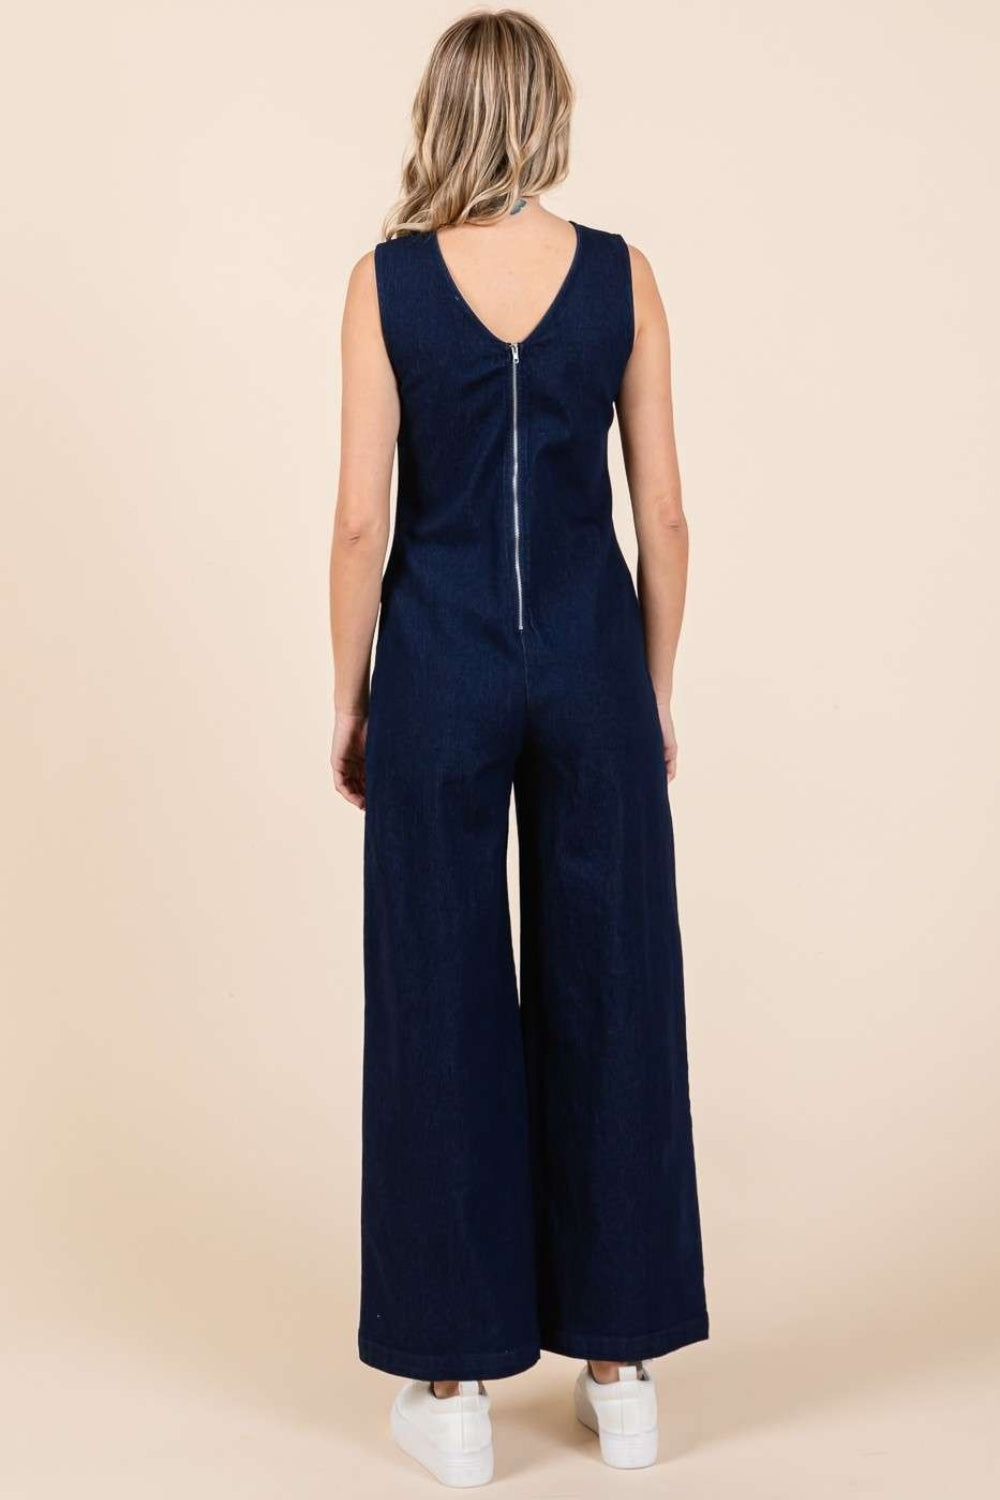 Mittoshop Sleeveless Wide Leg Denim Jumpsuit-Jumpsuits & Rompers-Inspired by Justeen-Women's Clothing Boutique in Chicago, Illinois